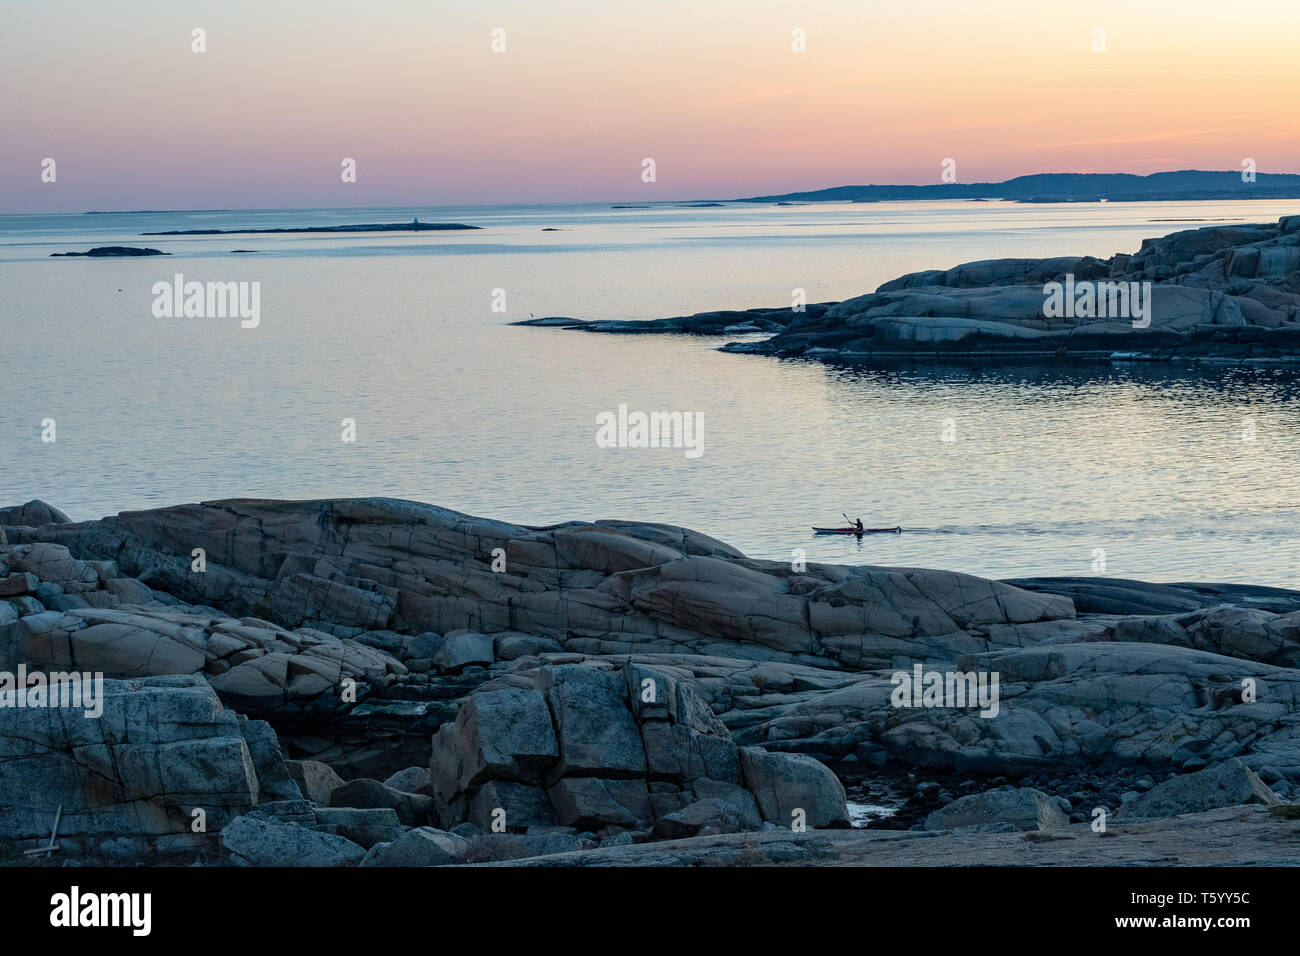 Kayaker on the calm water of 'the end of the world' rocks during sunset in Norway Stock Photo